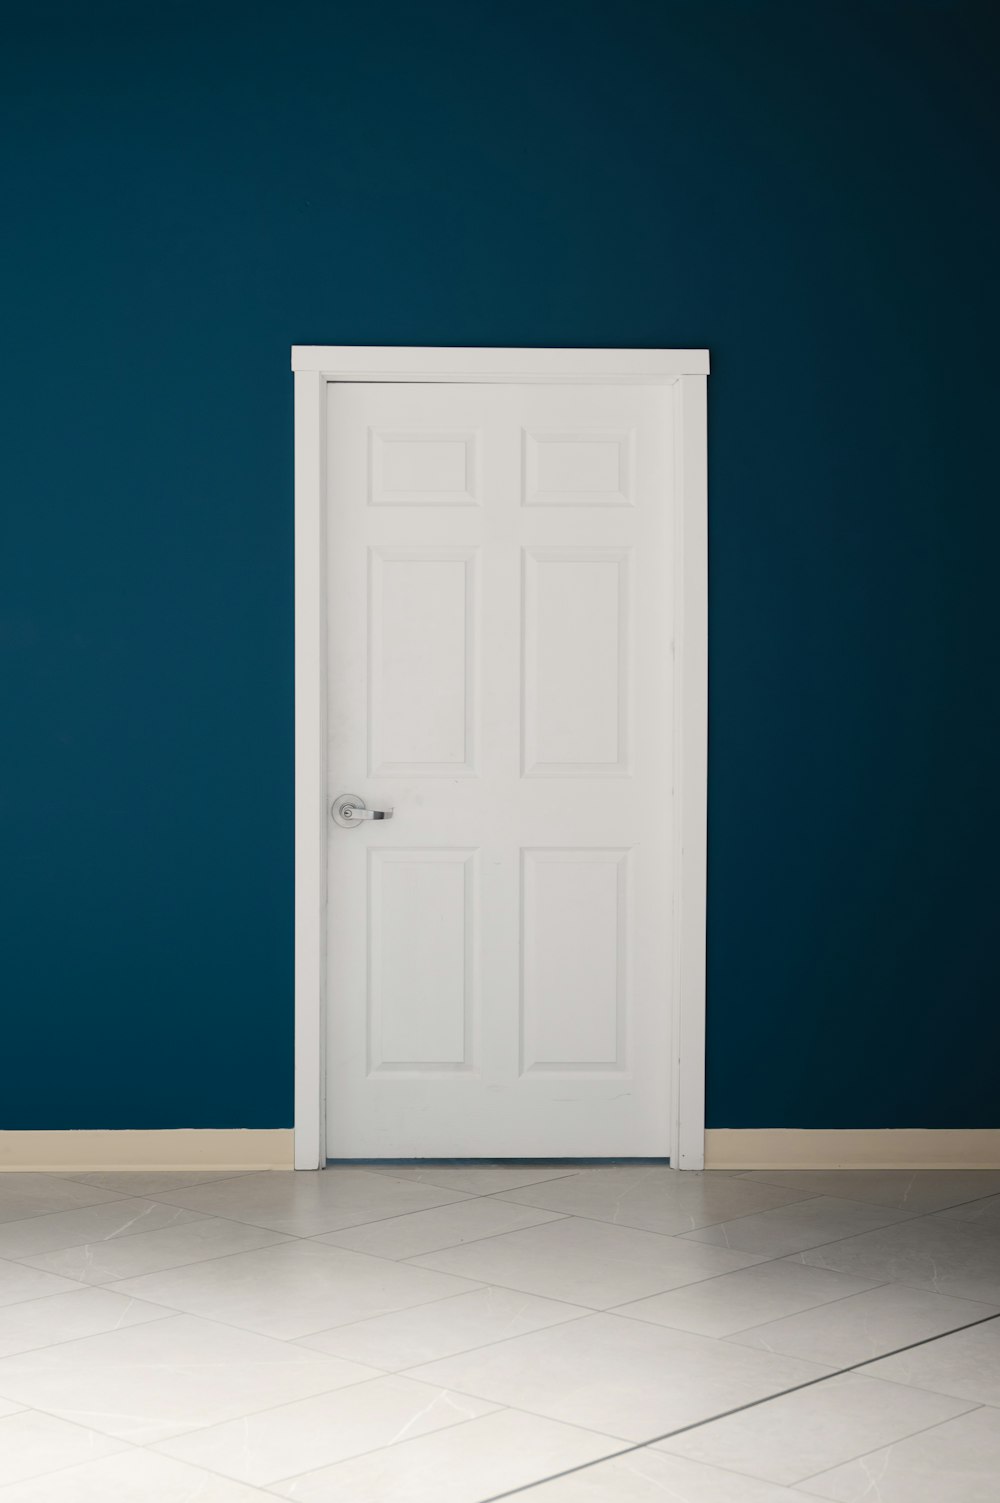 an empty room with a white door and a blue wall